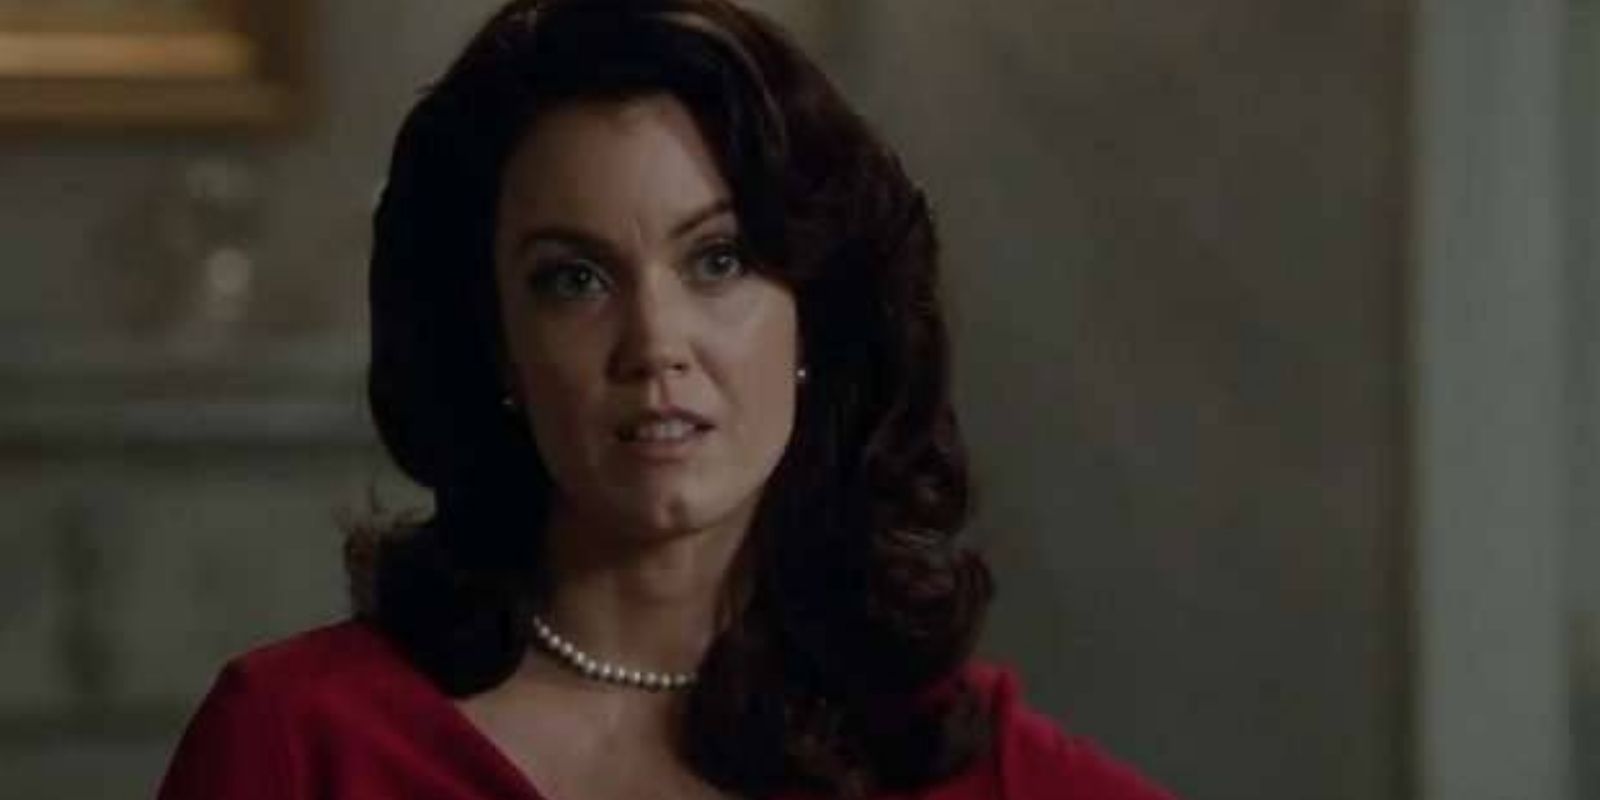 Mellie looks to someone off screen wearing red